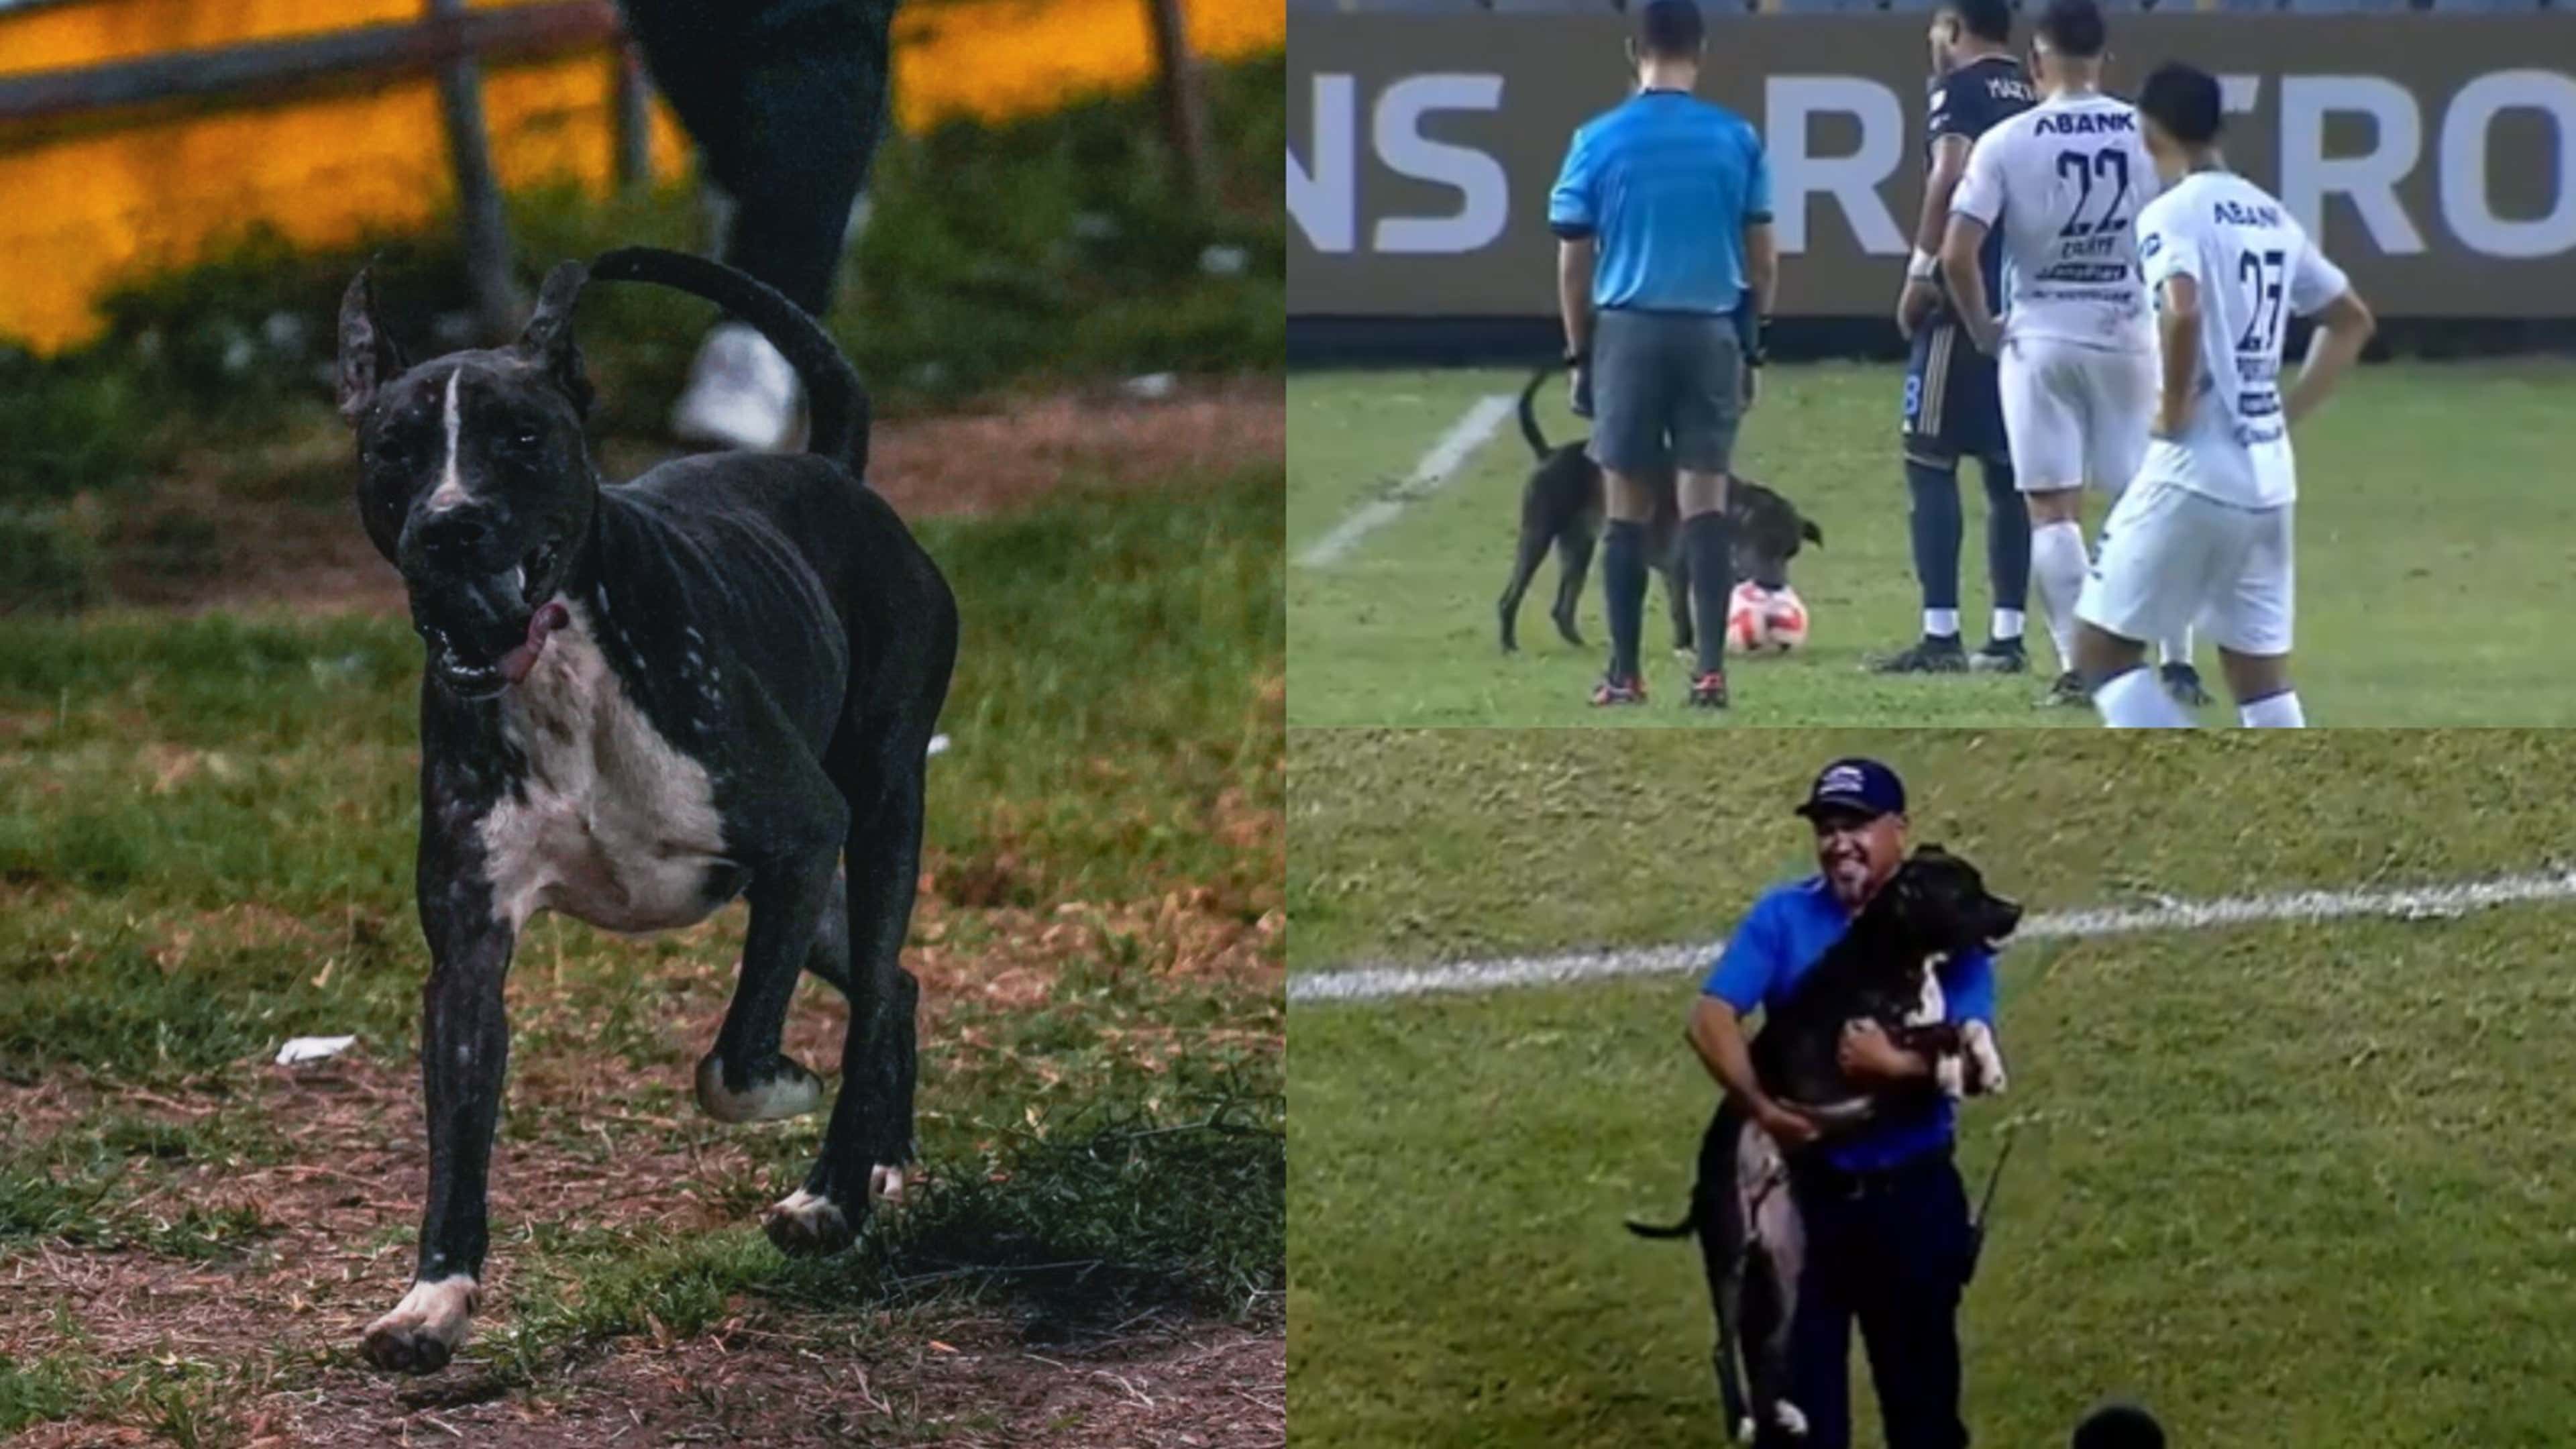 WATCH: What a good boy! Philadelphia Union CONCACAF clash stopped after dog  runs onto the pitch and steals the ball